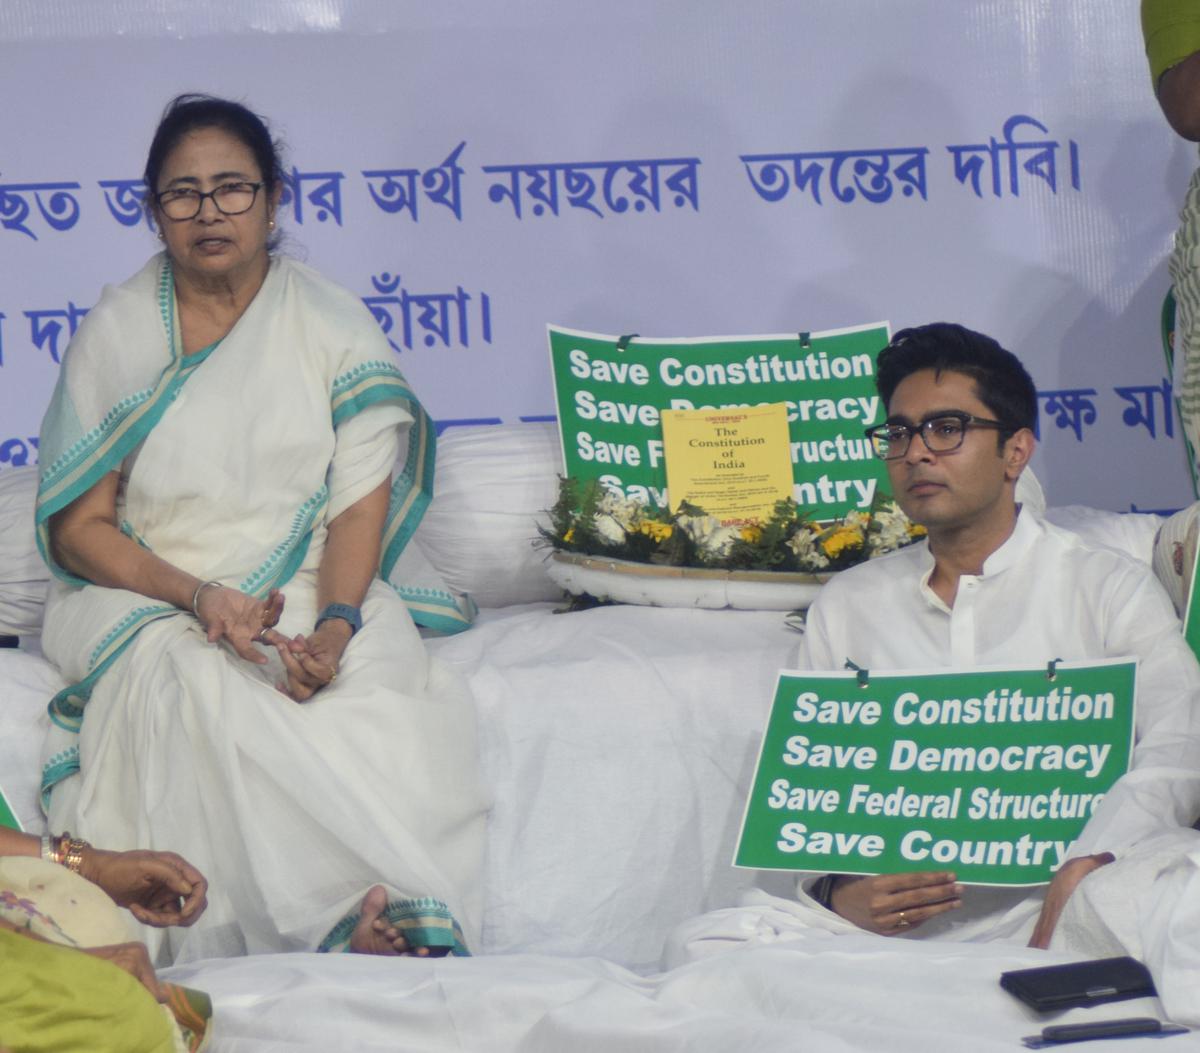 West Bengal Chief Minister Mamata Banerjee along with Trinamool Congress General Secretary Abhishek Banerjee launched a unique protest on Wednesday.